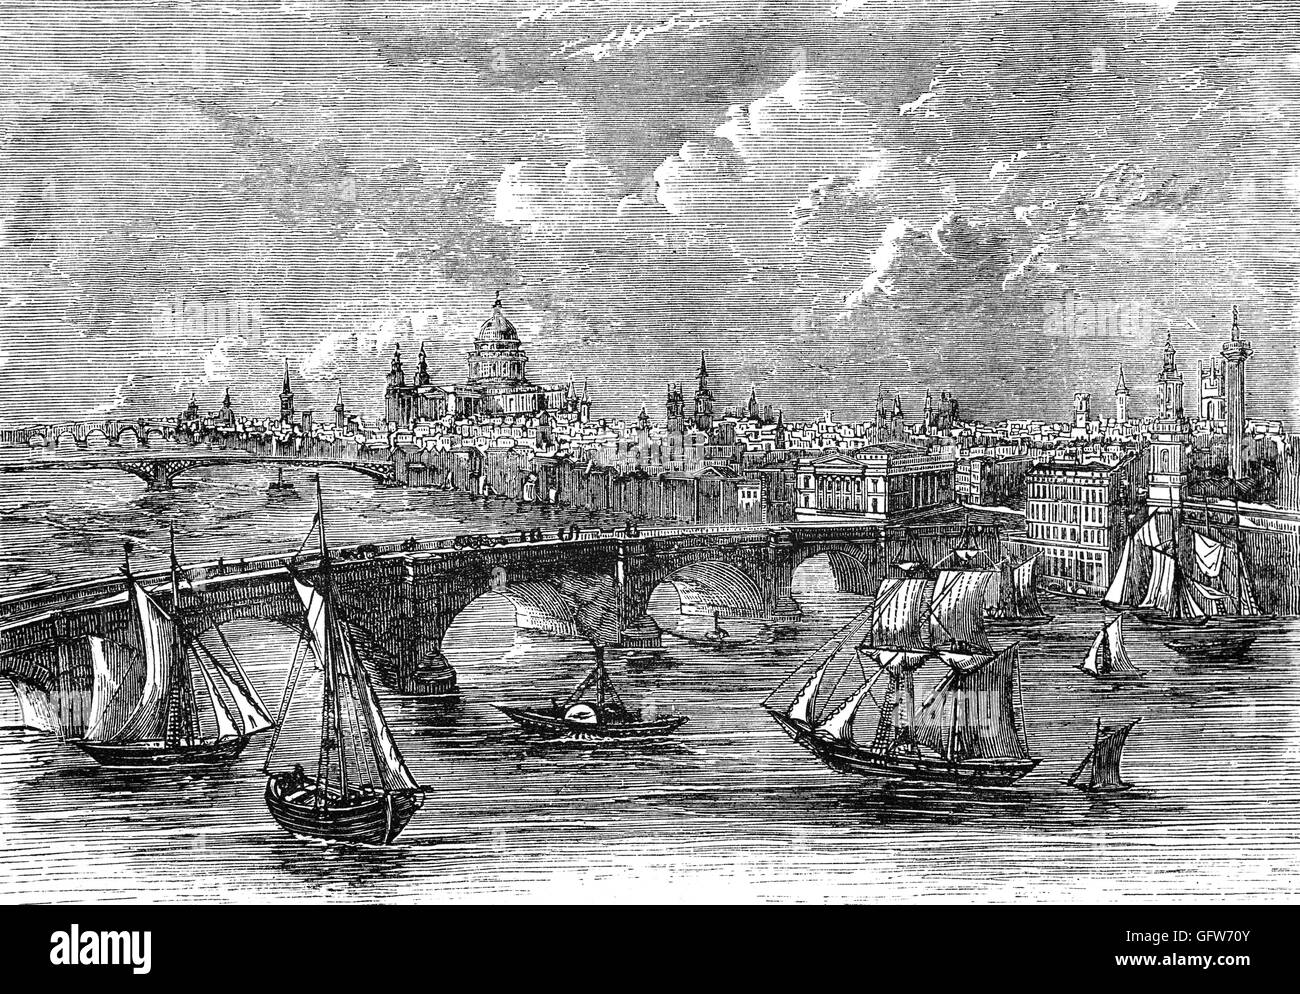 The old 600 year old London Bridge was narrow and decrepit, and blocked river traffic. In 1799, a competition for designs to replace the old bridge was held. John Rennie won the competition with a conventional design of five stone arches.  Work began in 1824 and the foundation stone was laid, in the southern coffer dam, on 15 June 1825. England. Stock Photo